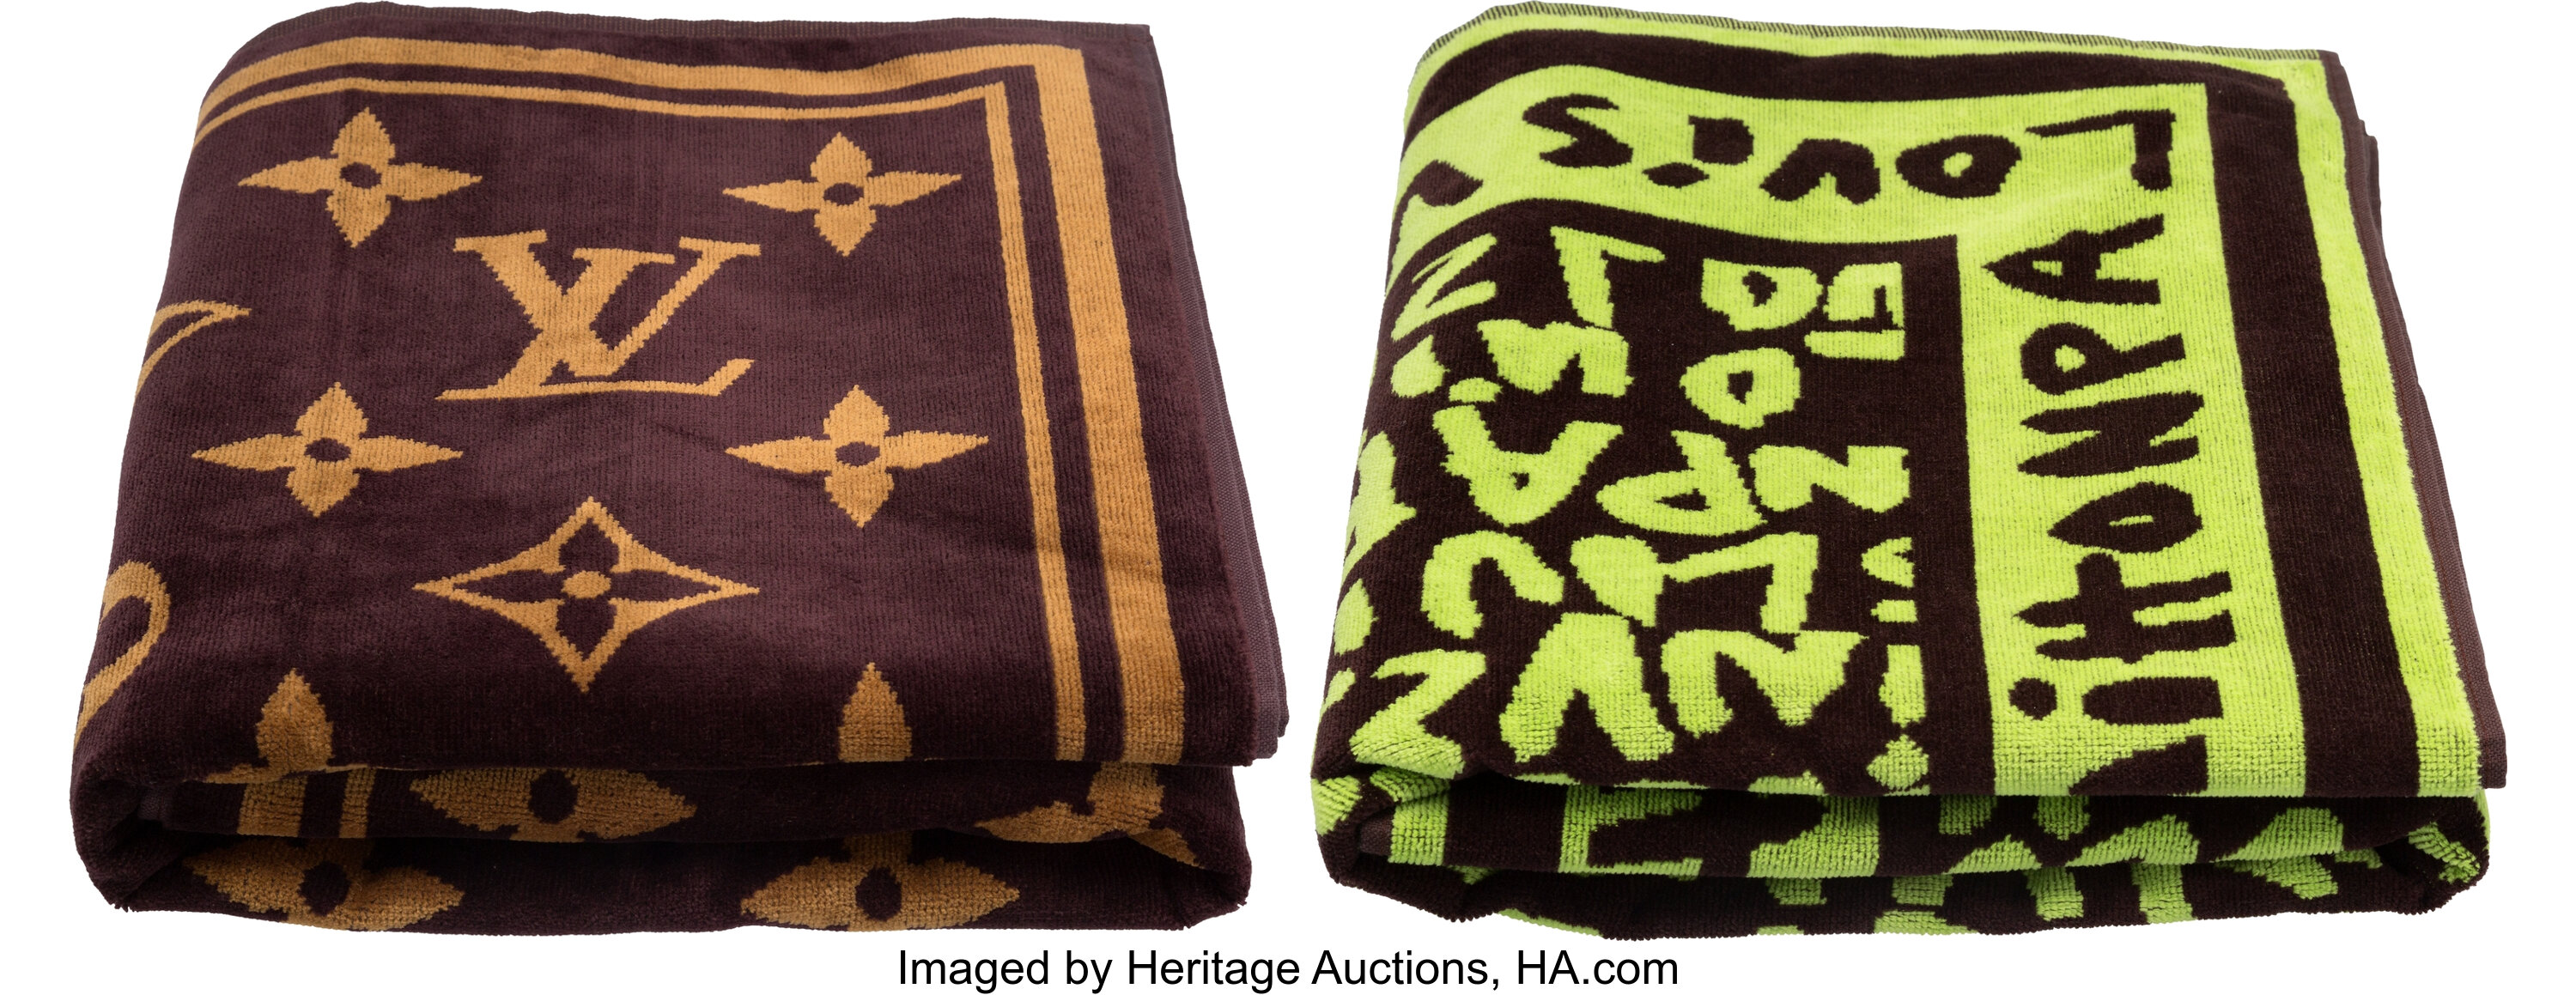 Louis Vuitton Set of Two; Green & Brown Terrycloth Towels., Lot #58265